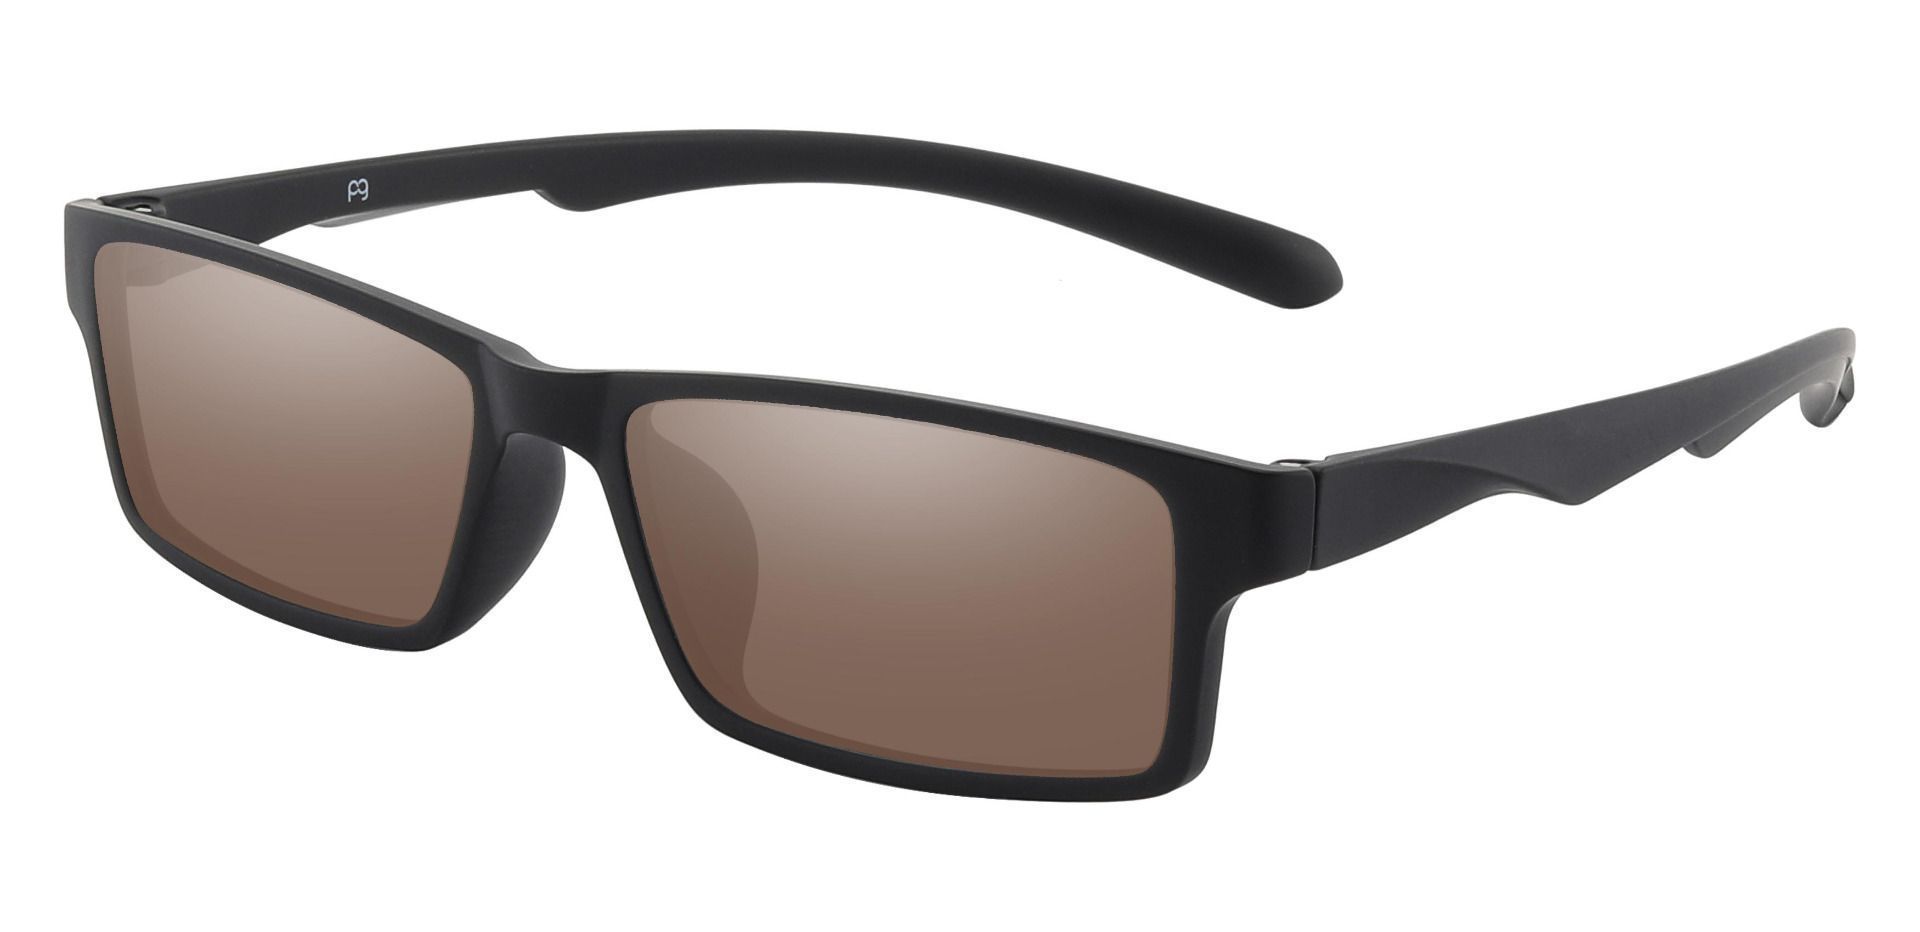 Walsh Rectangle Reading Sunglasses - Black Frame With Brown Lenses